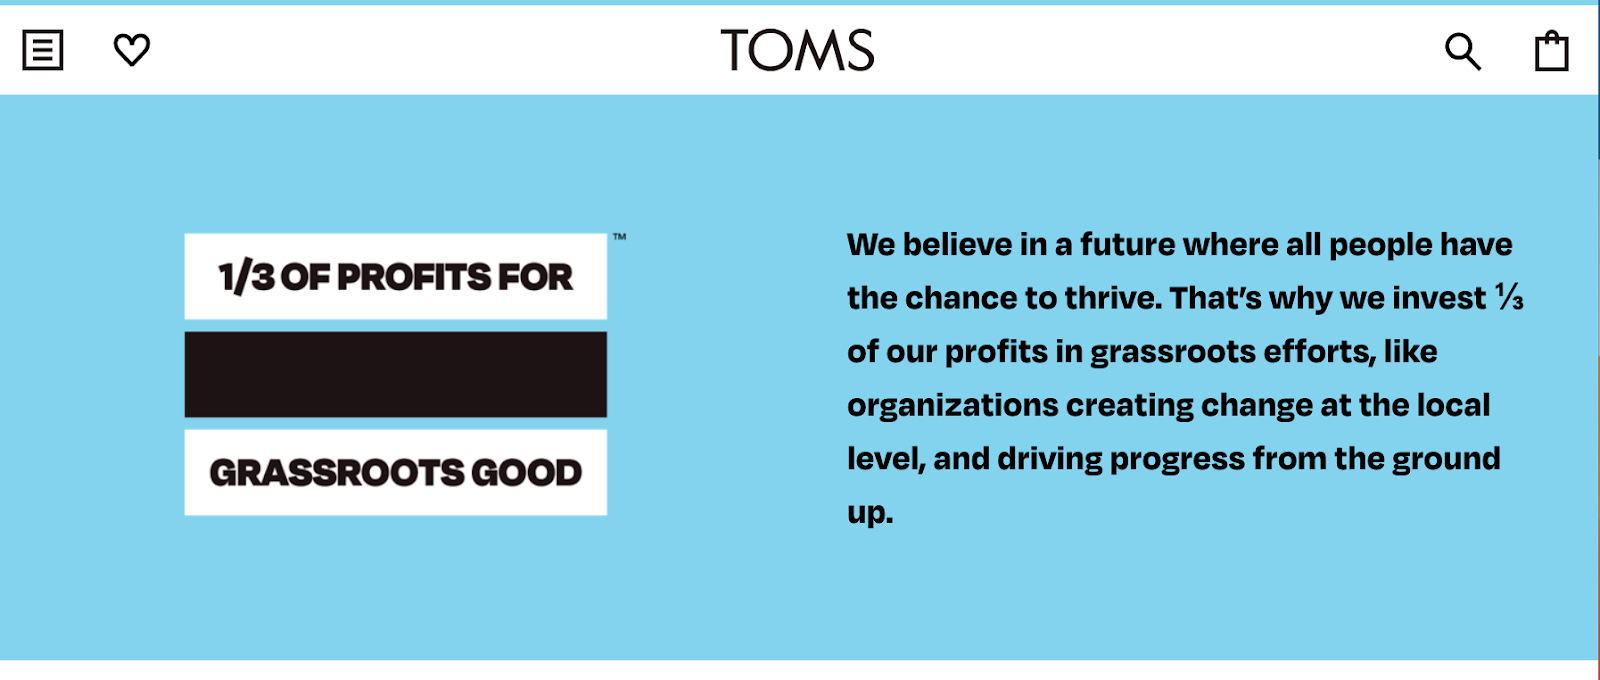 customer retention strategy example: TOMS